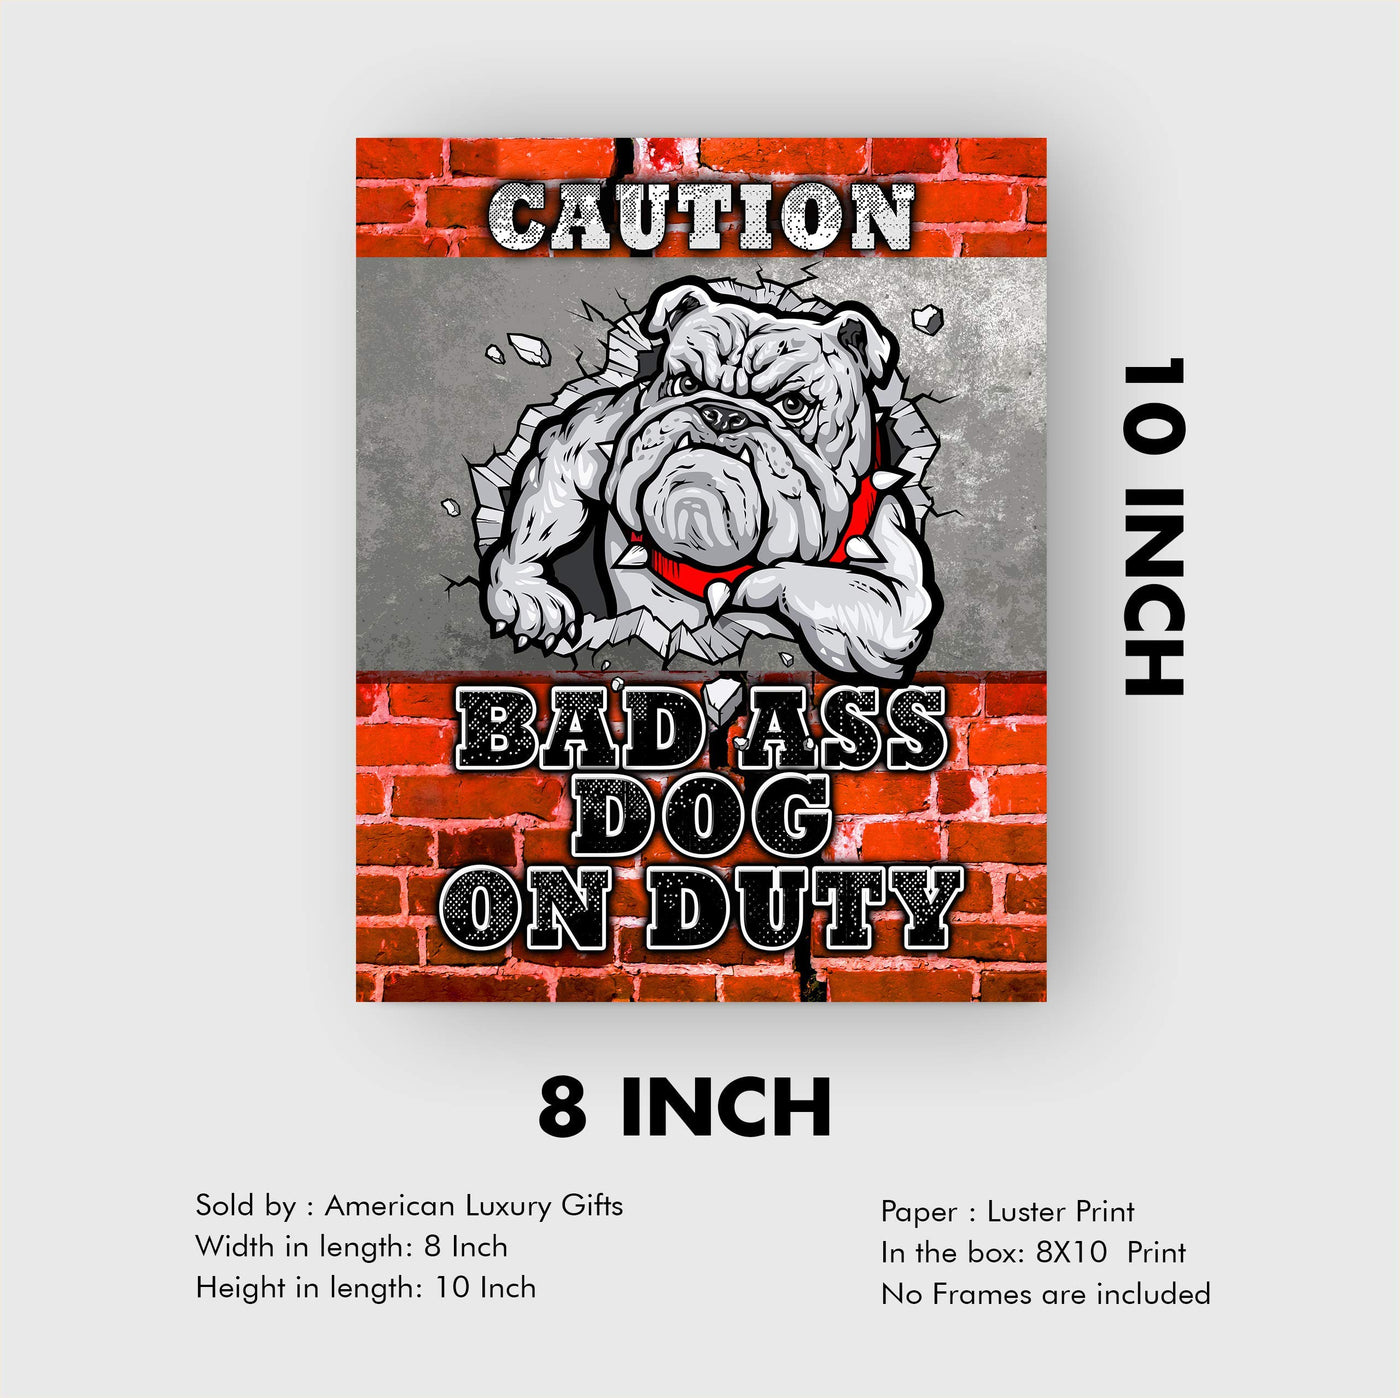 Caution: Badass Dog On Duty Funny Pet Sign-8 x 10" Typographic Brick Wall Art Print w/Bulldog Image-Ready to Frame. Humorous Decor for Home-Kitchen-Garage-Shop-Patio. Fun Gift for All Dog Lovers!